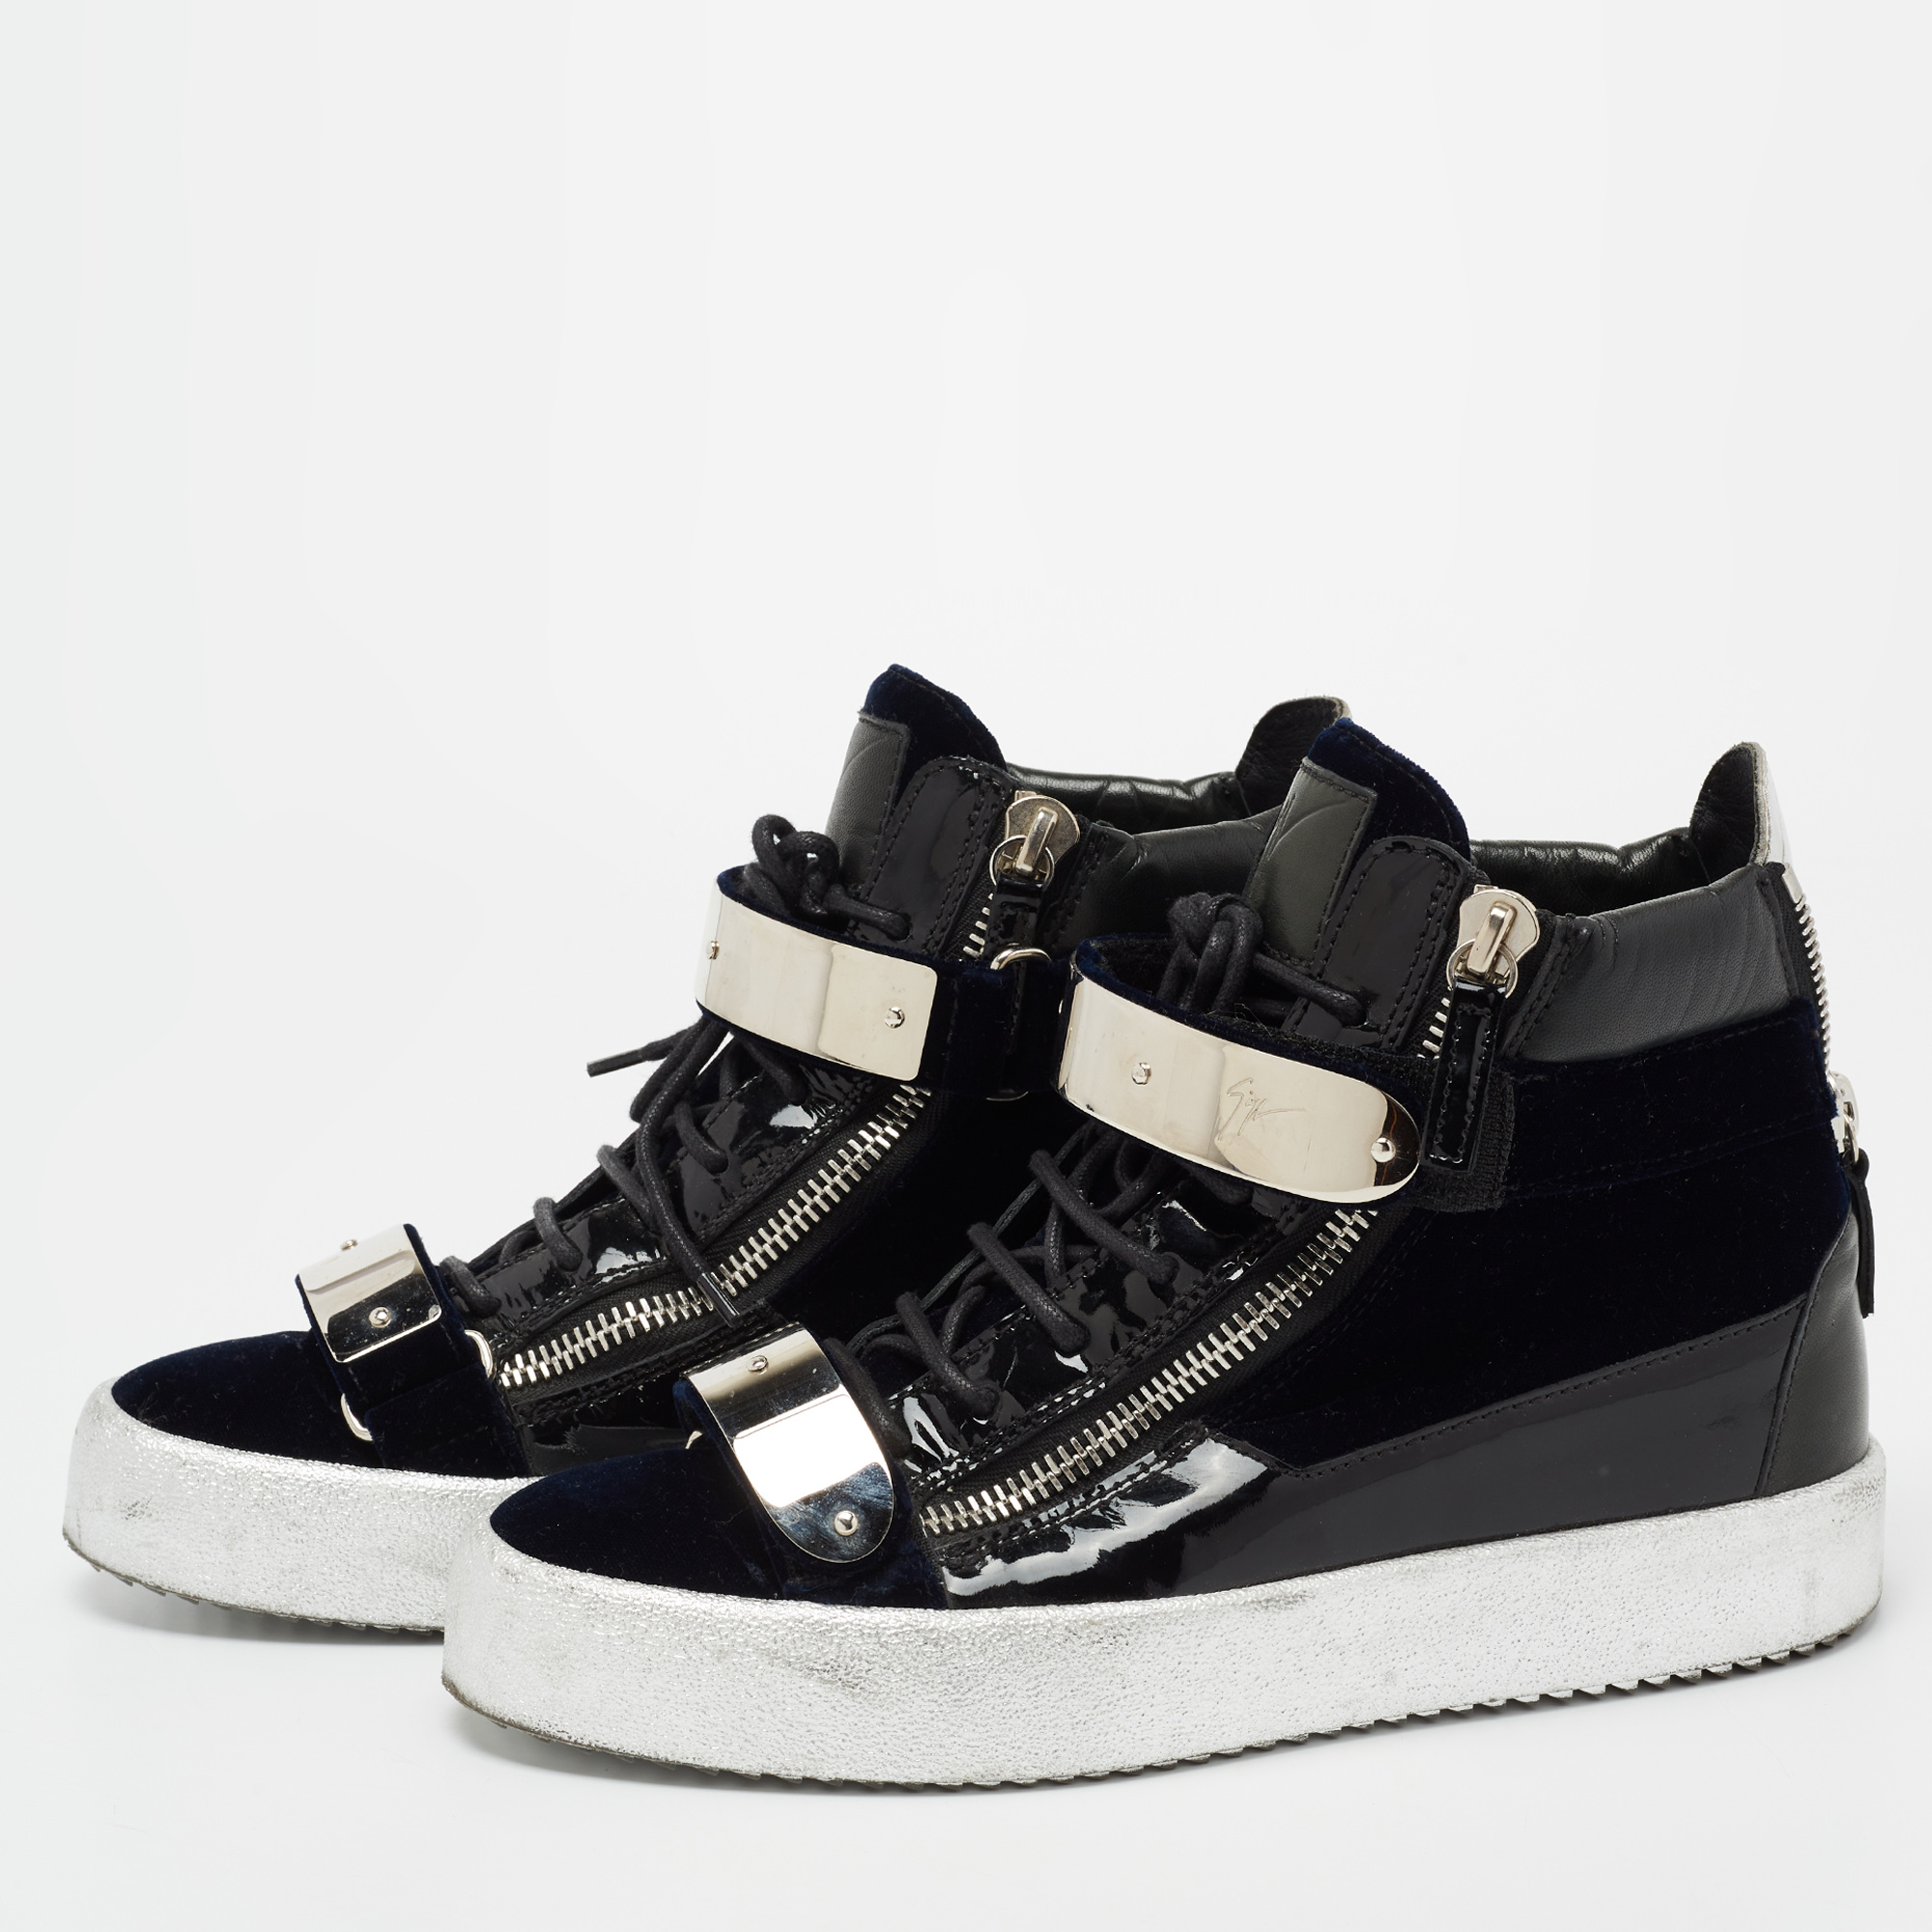 

Giuseppe Zanotti Navy Blue/Black Velvet and Patent Leather Coby High-Top Sneakers Size